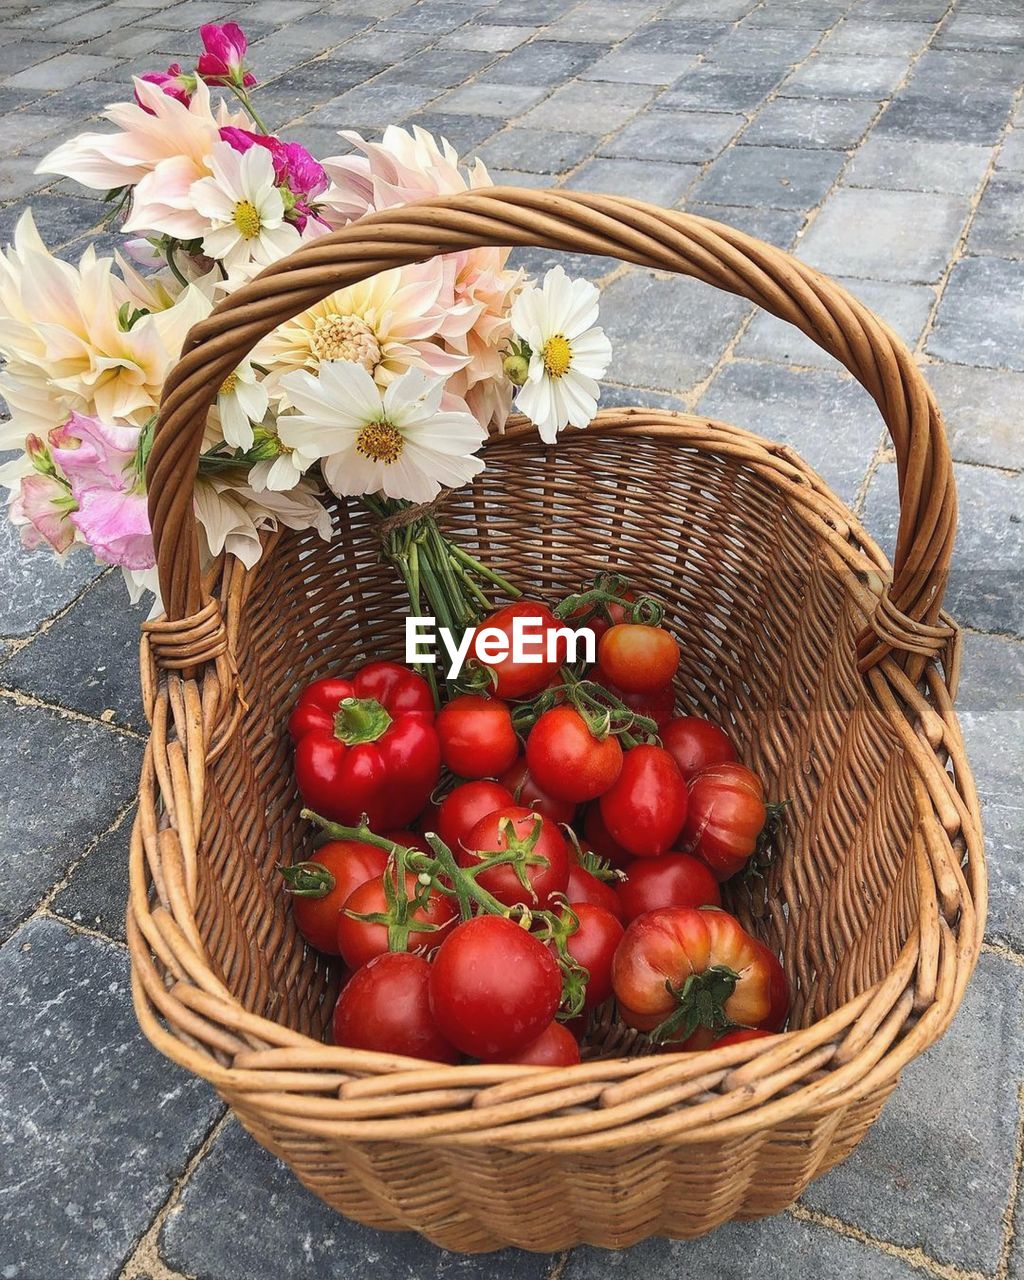 HIGH ANGLE VIEW OF CHERRIES IN BASKET